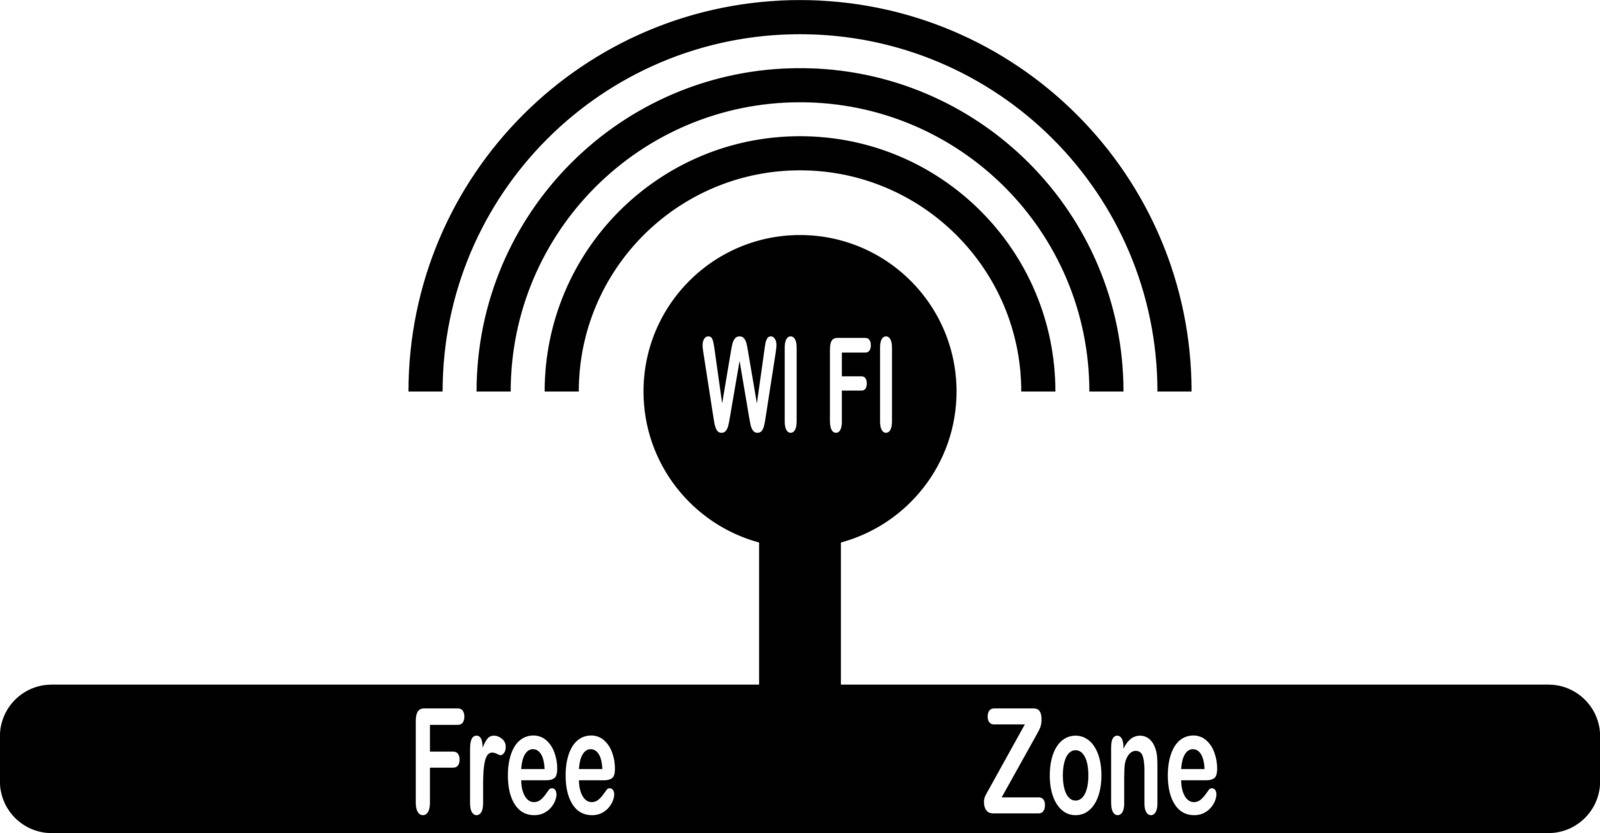 WiFi router icon and free zone legend by Grommik